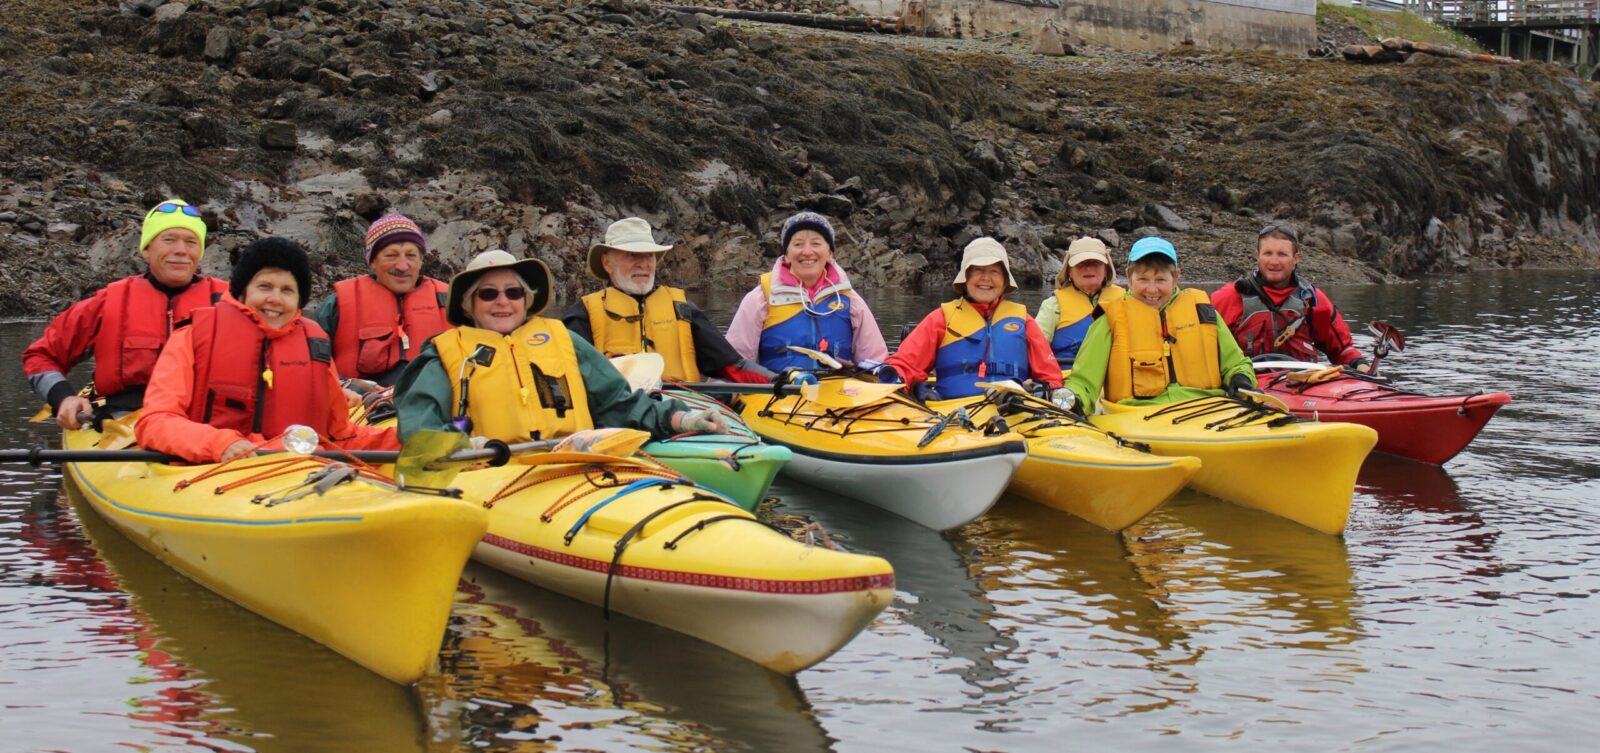 A group of people in yellow kayaks.